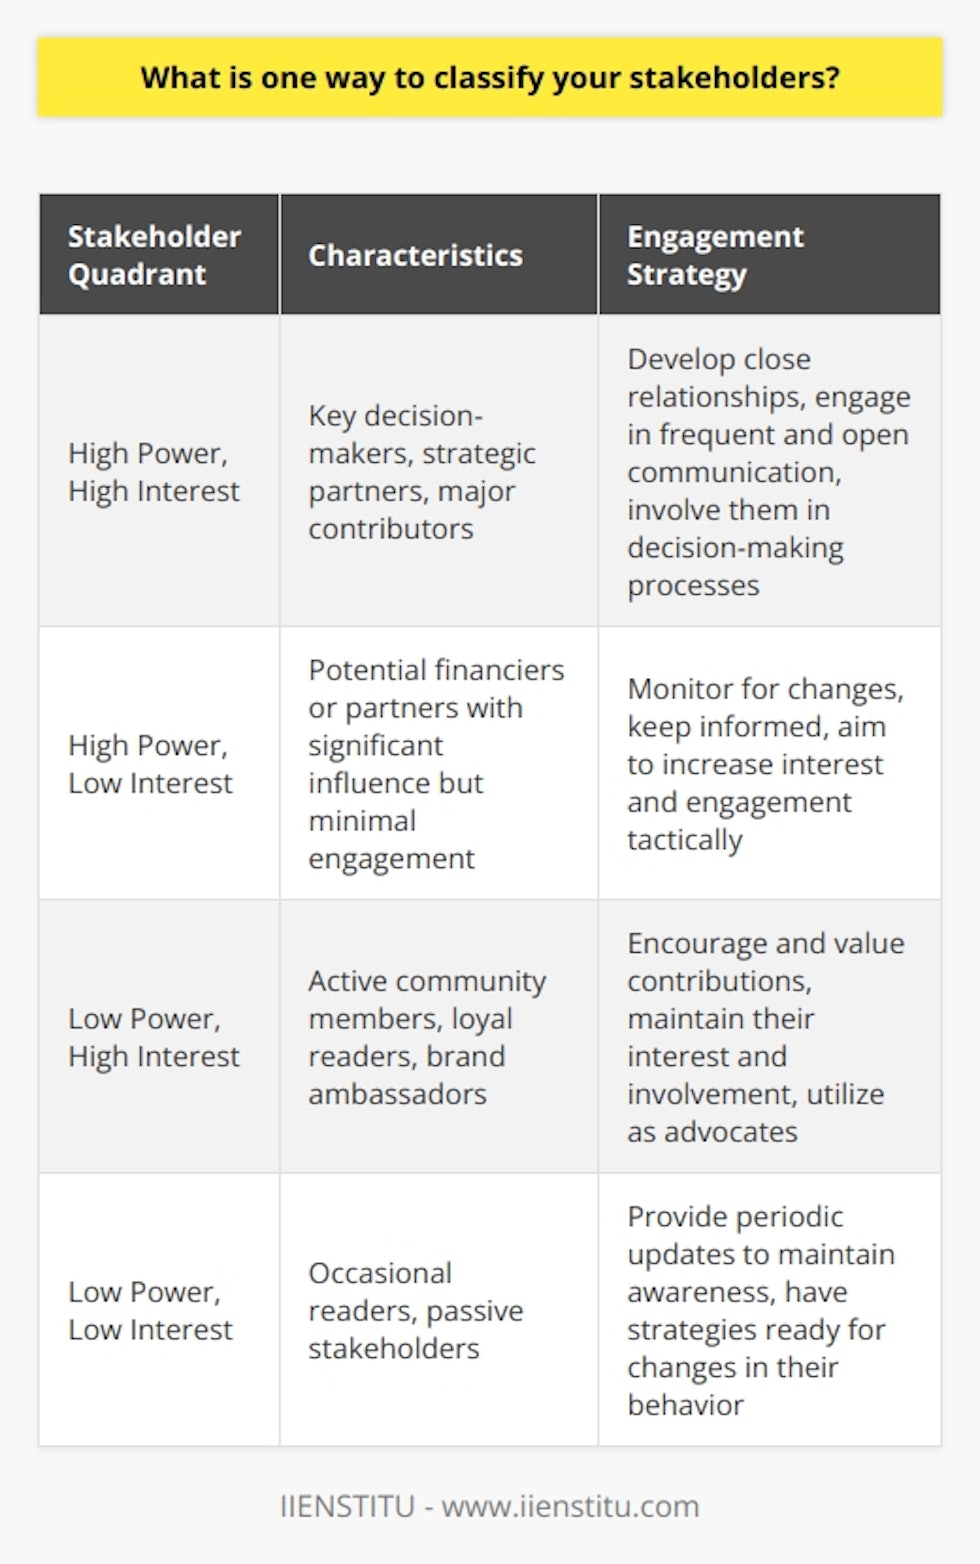 Classifying stakeholders by their power and interest is a strategic approach that offers insight into how individuals or entities may engage with or influence a project such as a blog. This classification can be particularly valuable for organizations such as IIENSTITU, which may run a variety of educational and informational blogs as part of their operations.**Power Assessment**To determine stakeholder power, one must reflect on each stakeholder's ability to impact the blog. This impact could manifest through decision-making capabilities, financial contributions, or their role in content distribution and reach. A stakeholder with significant power might be someone with access to technical resources vital for the blog's deployment, or it could be a regulatory body that could influence the operation of the blog based on legal or ethical guidelines.**Interest Evaluation**Evaluating interest involves looking at the stakeholder's level of concern or enthusiasm for the blog's performance and content. Those with high interest might regularly engage with posts, leave comments, share content on their networks, or contribute their own writings if the platform allows for guest posts. Their feedback and interactions can be instrumental in shaping the tone and direction of the blog.**Stakeholder Quadrants**With the power and interest dimensions defined, stakeholders can be mapped onto a matrix, typically known as the Power/Interest grid, which helps in developing communication and engagement strategies for each group:1. **High Power, High Interest**: This quadrant includes the blog's primary stakeholders. A tailored strategy to foster strong relationships and open communication lines with these stakeholders is essential. They might include lead content creators, strategic partners, or high-value contributors who are instrumental in driving the blog forward.2. **High Power, Low Interest**: Stakeholders here might not engage much with the blog but hold the power to affect it significantly. These could be potential financiers or partners who are currently passive but could either accelerate or impede the blog's progress depending on changes in their engagement level.3. **Low Power, High Interest**: Often this quadrant is populated with the blog's most loyal readers and community members. They may not have formal power but their advocacy and engagement are valuable. Honoring their contributions and maintaining their involvement is key, as they can act as ambassadors for the blog's brand. 4. **Low Power, Low Interest**: Stakeholders with both low power and interest typically require minimal direct management but keeping them informed might be beneficial. They might be occasional readers or those who sporadically consume content. Out of sight, out of mind can be risky; changes in their perception or behavior can arise and it's wise to be prepared.To summarize, classifying stakeholders in terms of power and interest provides a structured way to visualize and prioritize where efforts and resources should be focused to manage a blog effectively. Each quadrant necessitates a different handling strategy and by tailoring communications and engagement efforts accordingly, a blog owner or a content-focused institution like IIENSTITU can ensure they address the needs of their stakeholders in an efficient and proactive manner.